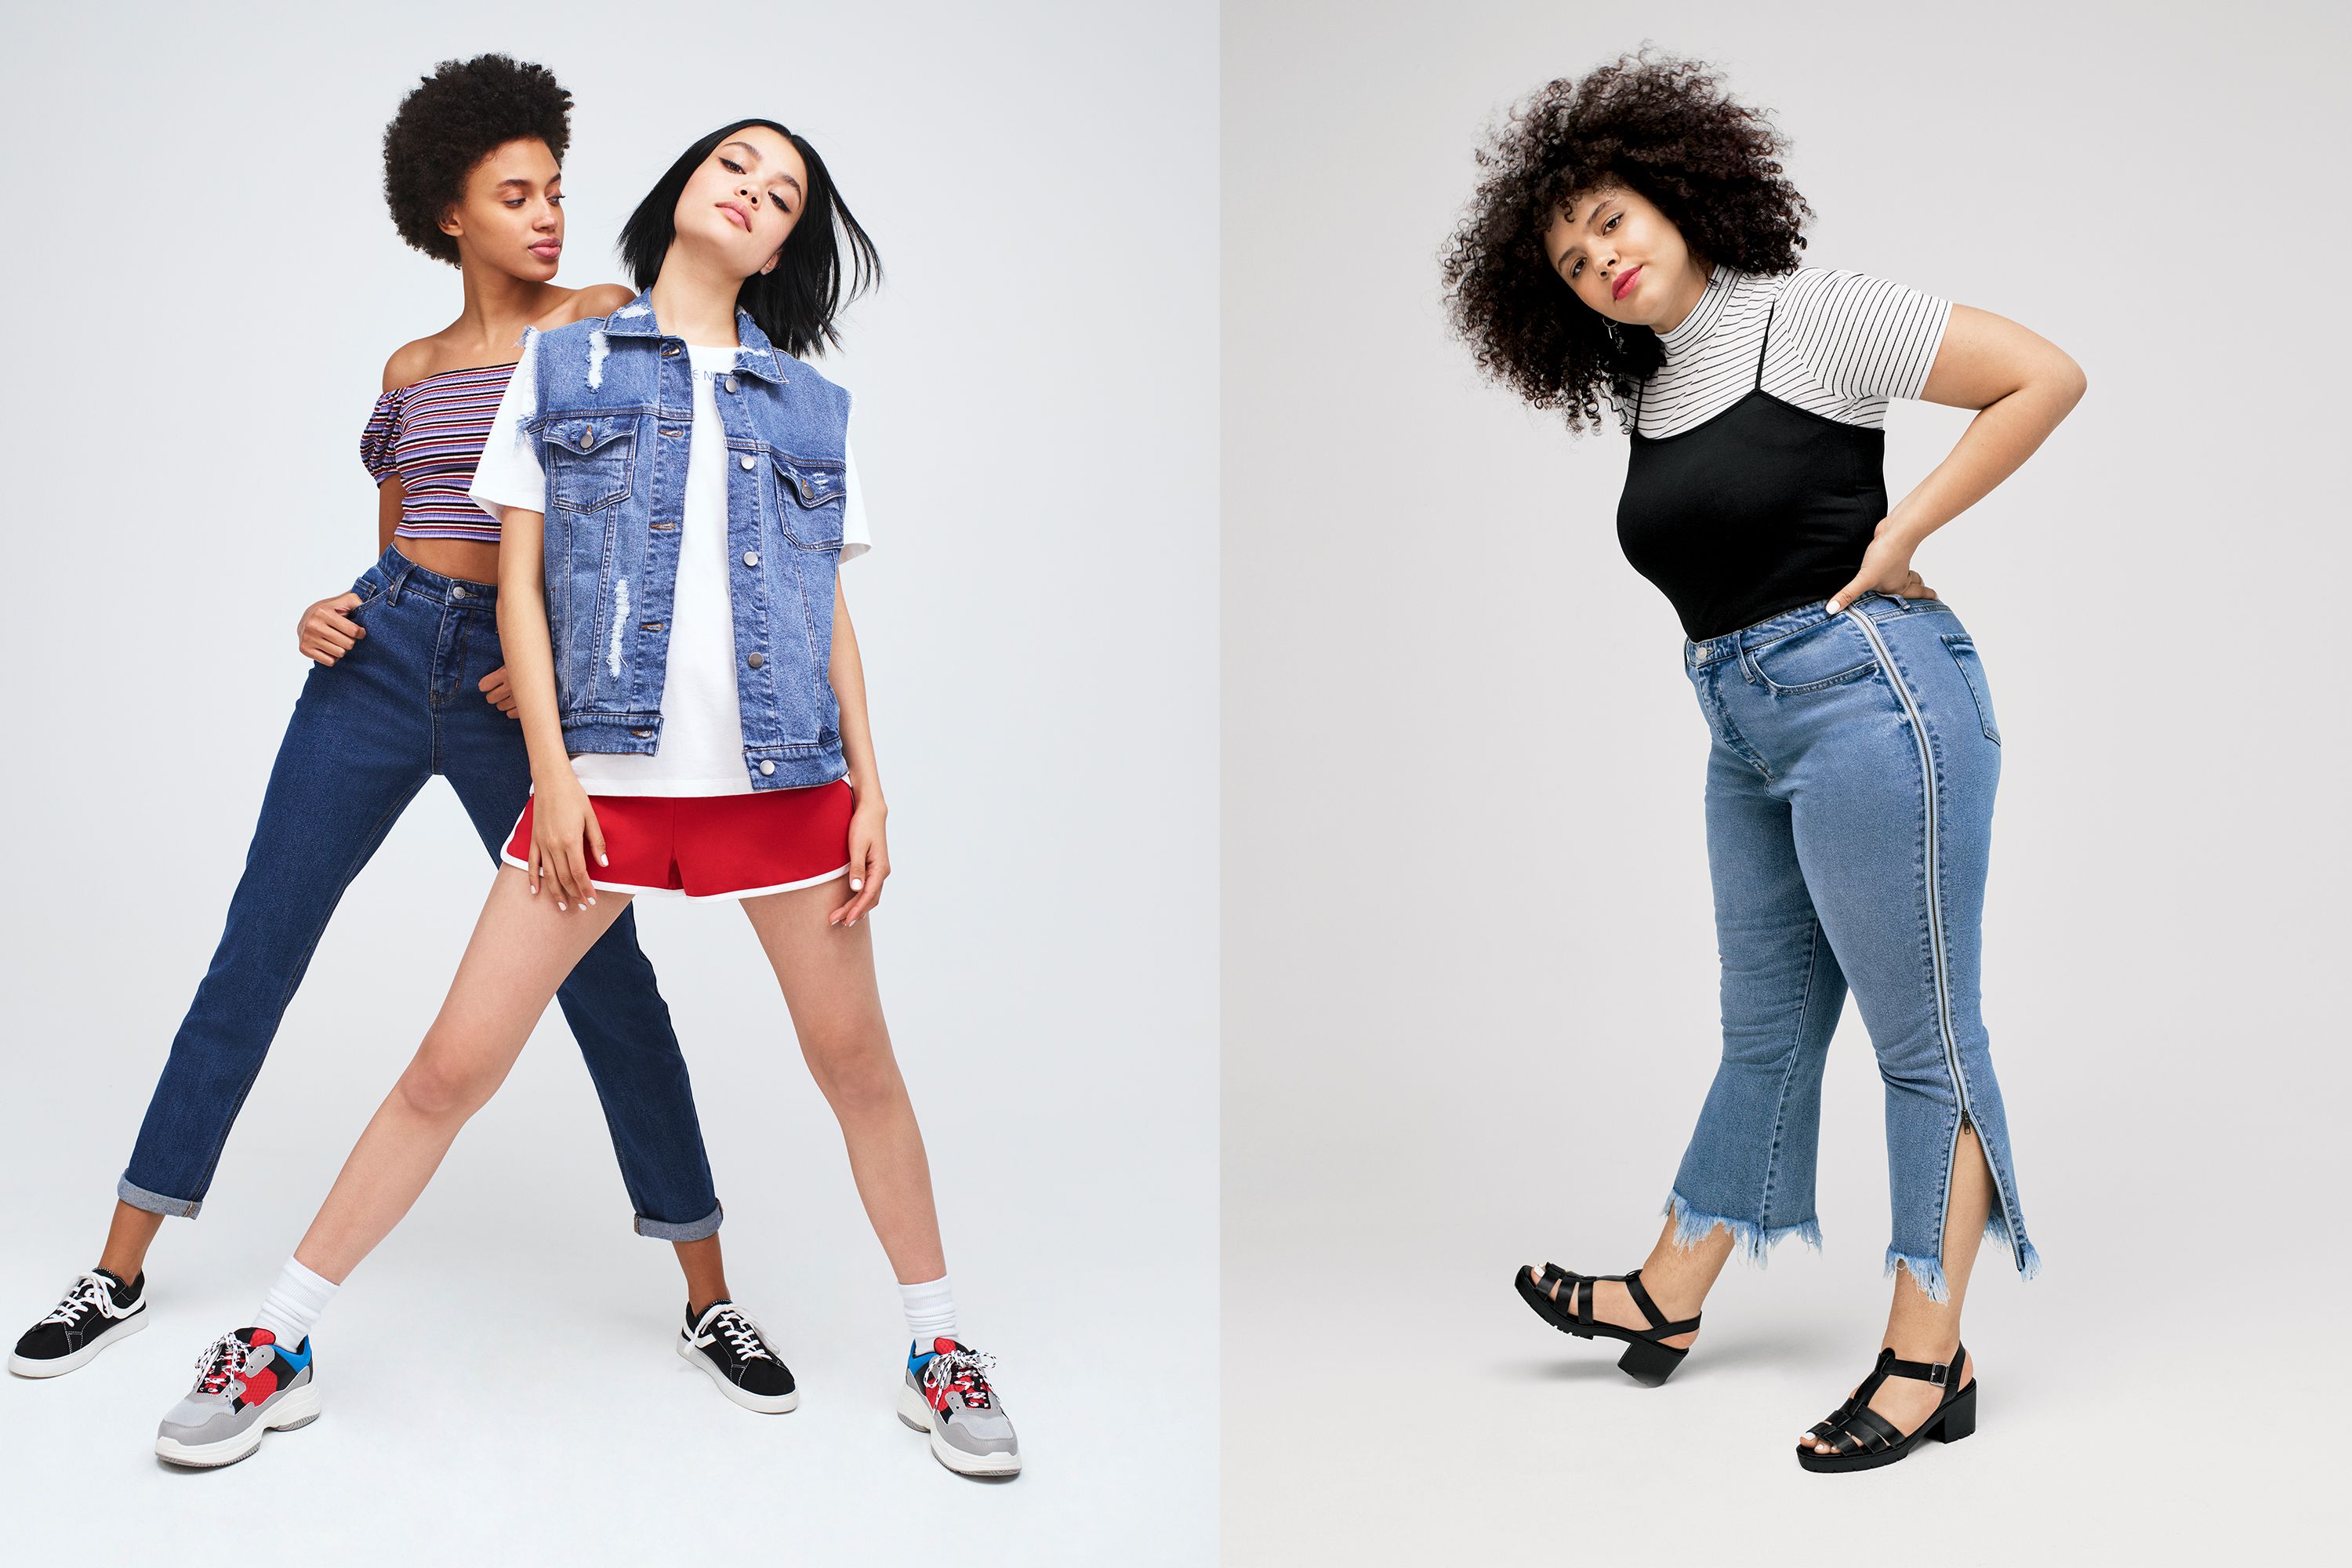 All the Best Looks from Target's New Fashion Line Wild Fable - Brit + Co